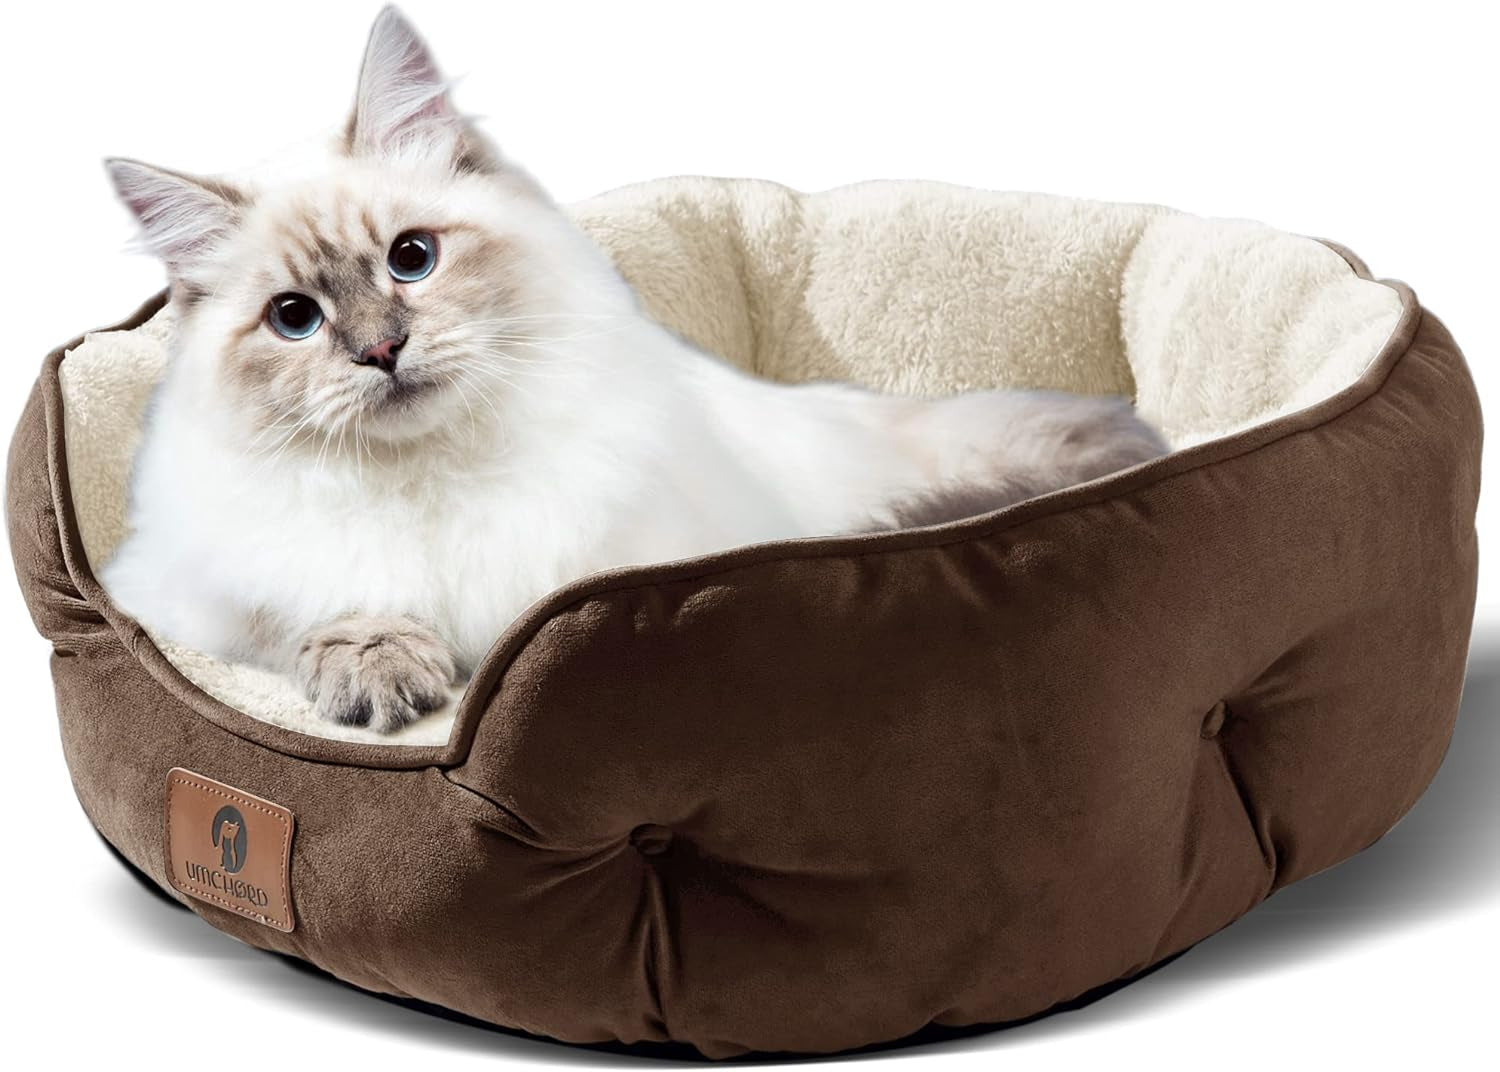 Cozy Retreat for Small Pets: Small Dog Bed and Cat Beds for Indoor Comfort - Extra Soft, Machine Washable, Anti-Slip, Water-Resistant Oxford Bottom in Elegant Brown (20 Inches)